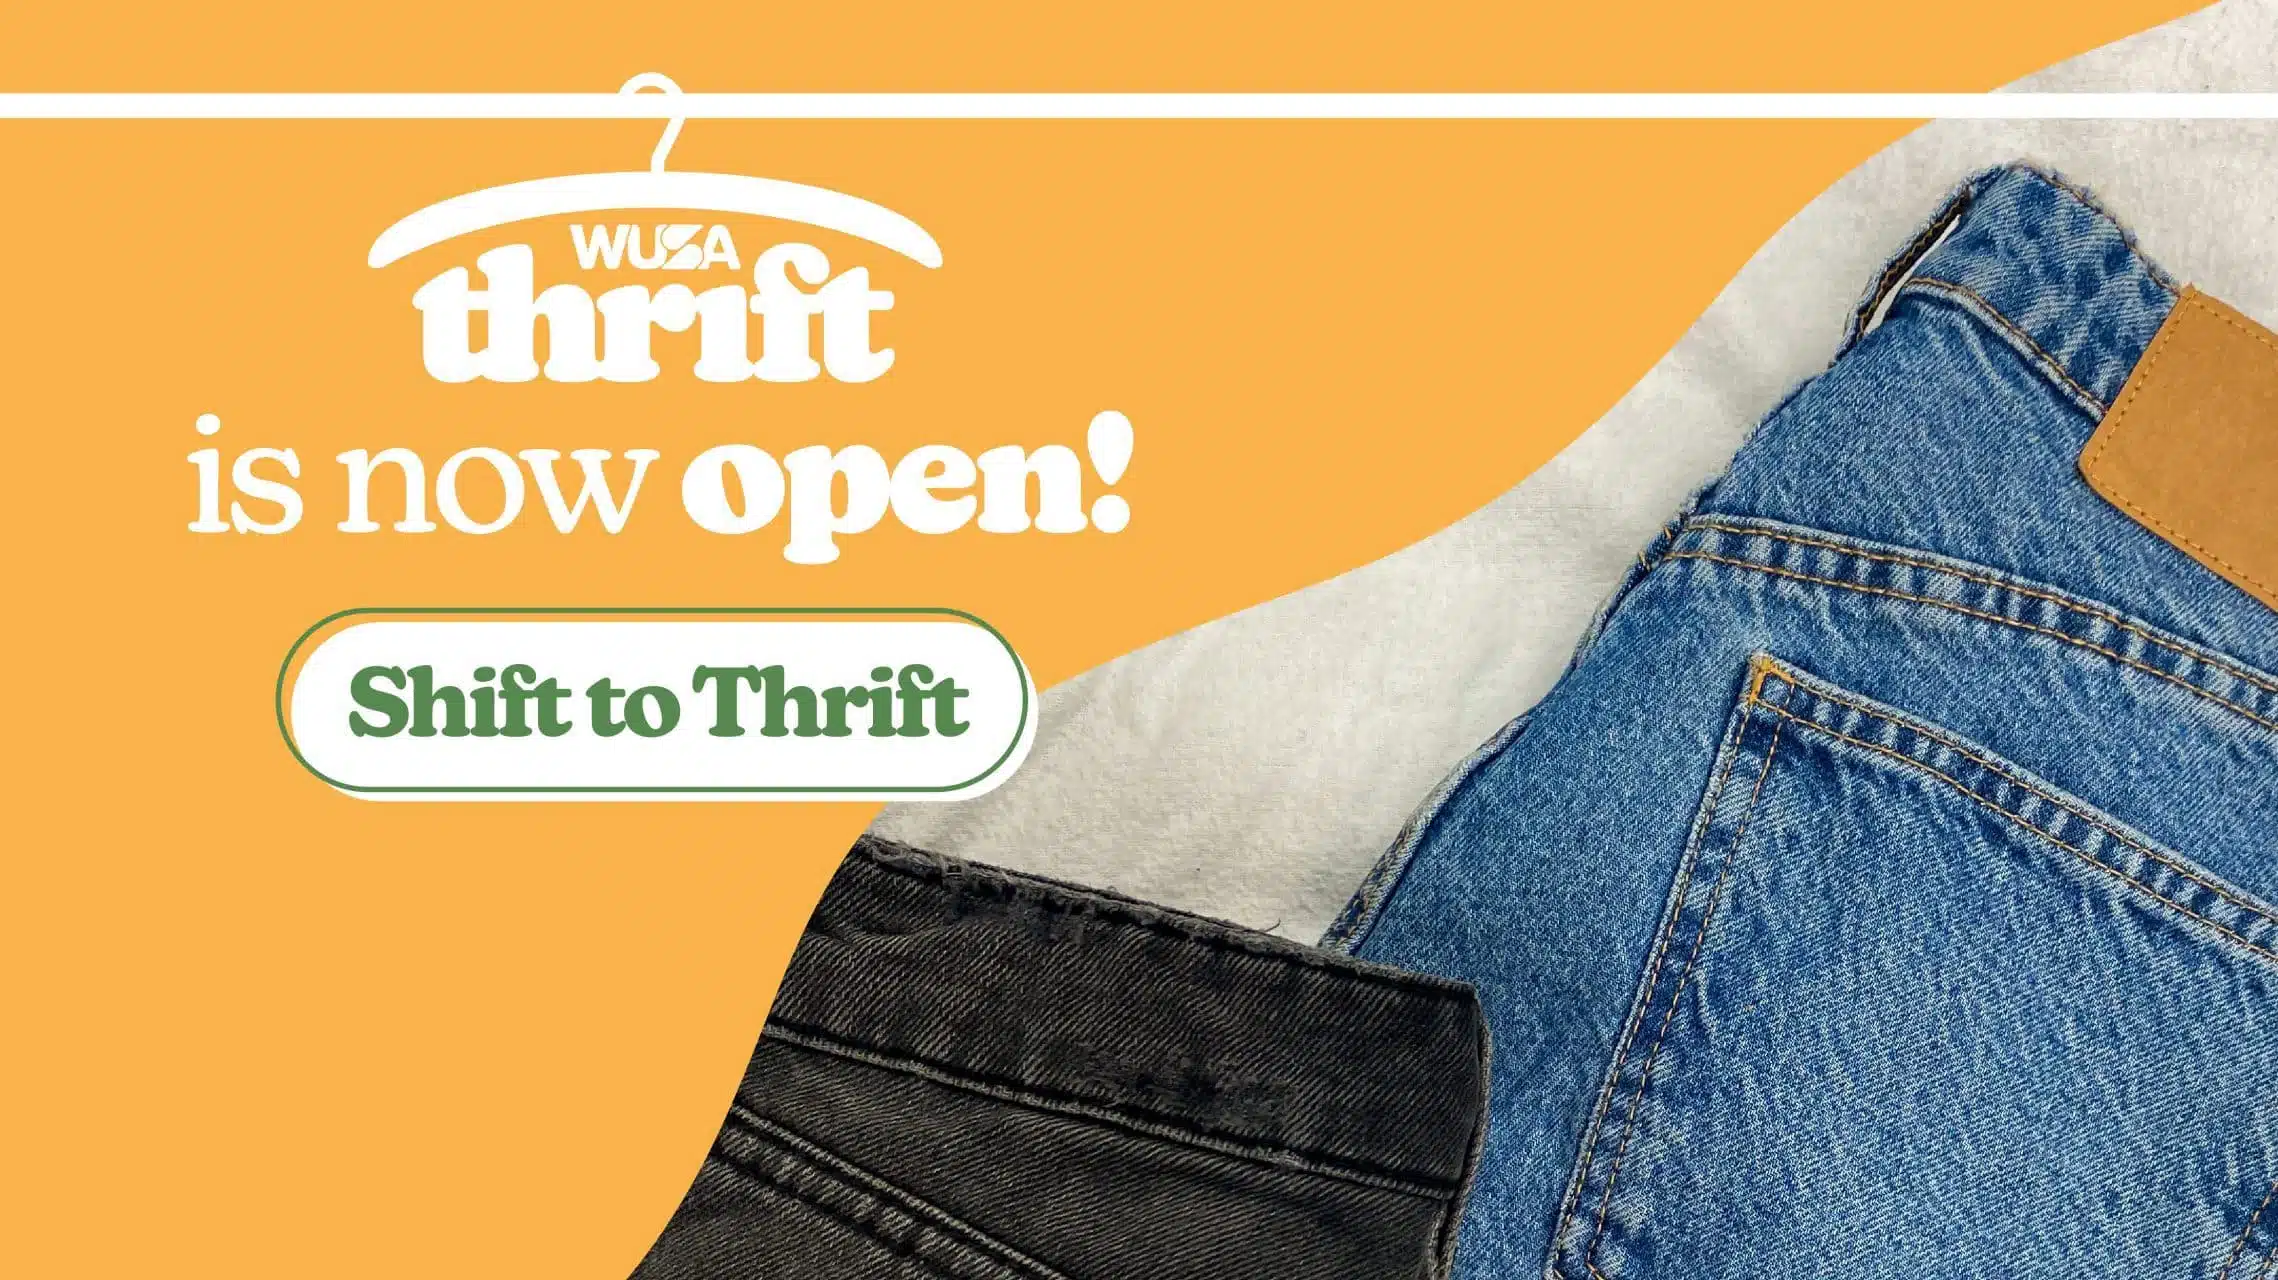 WUSA Thrift is now open!